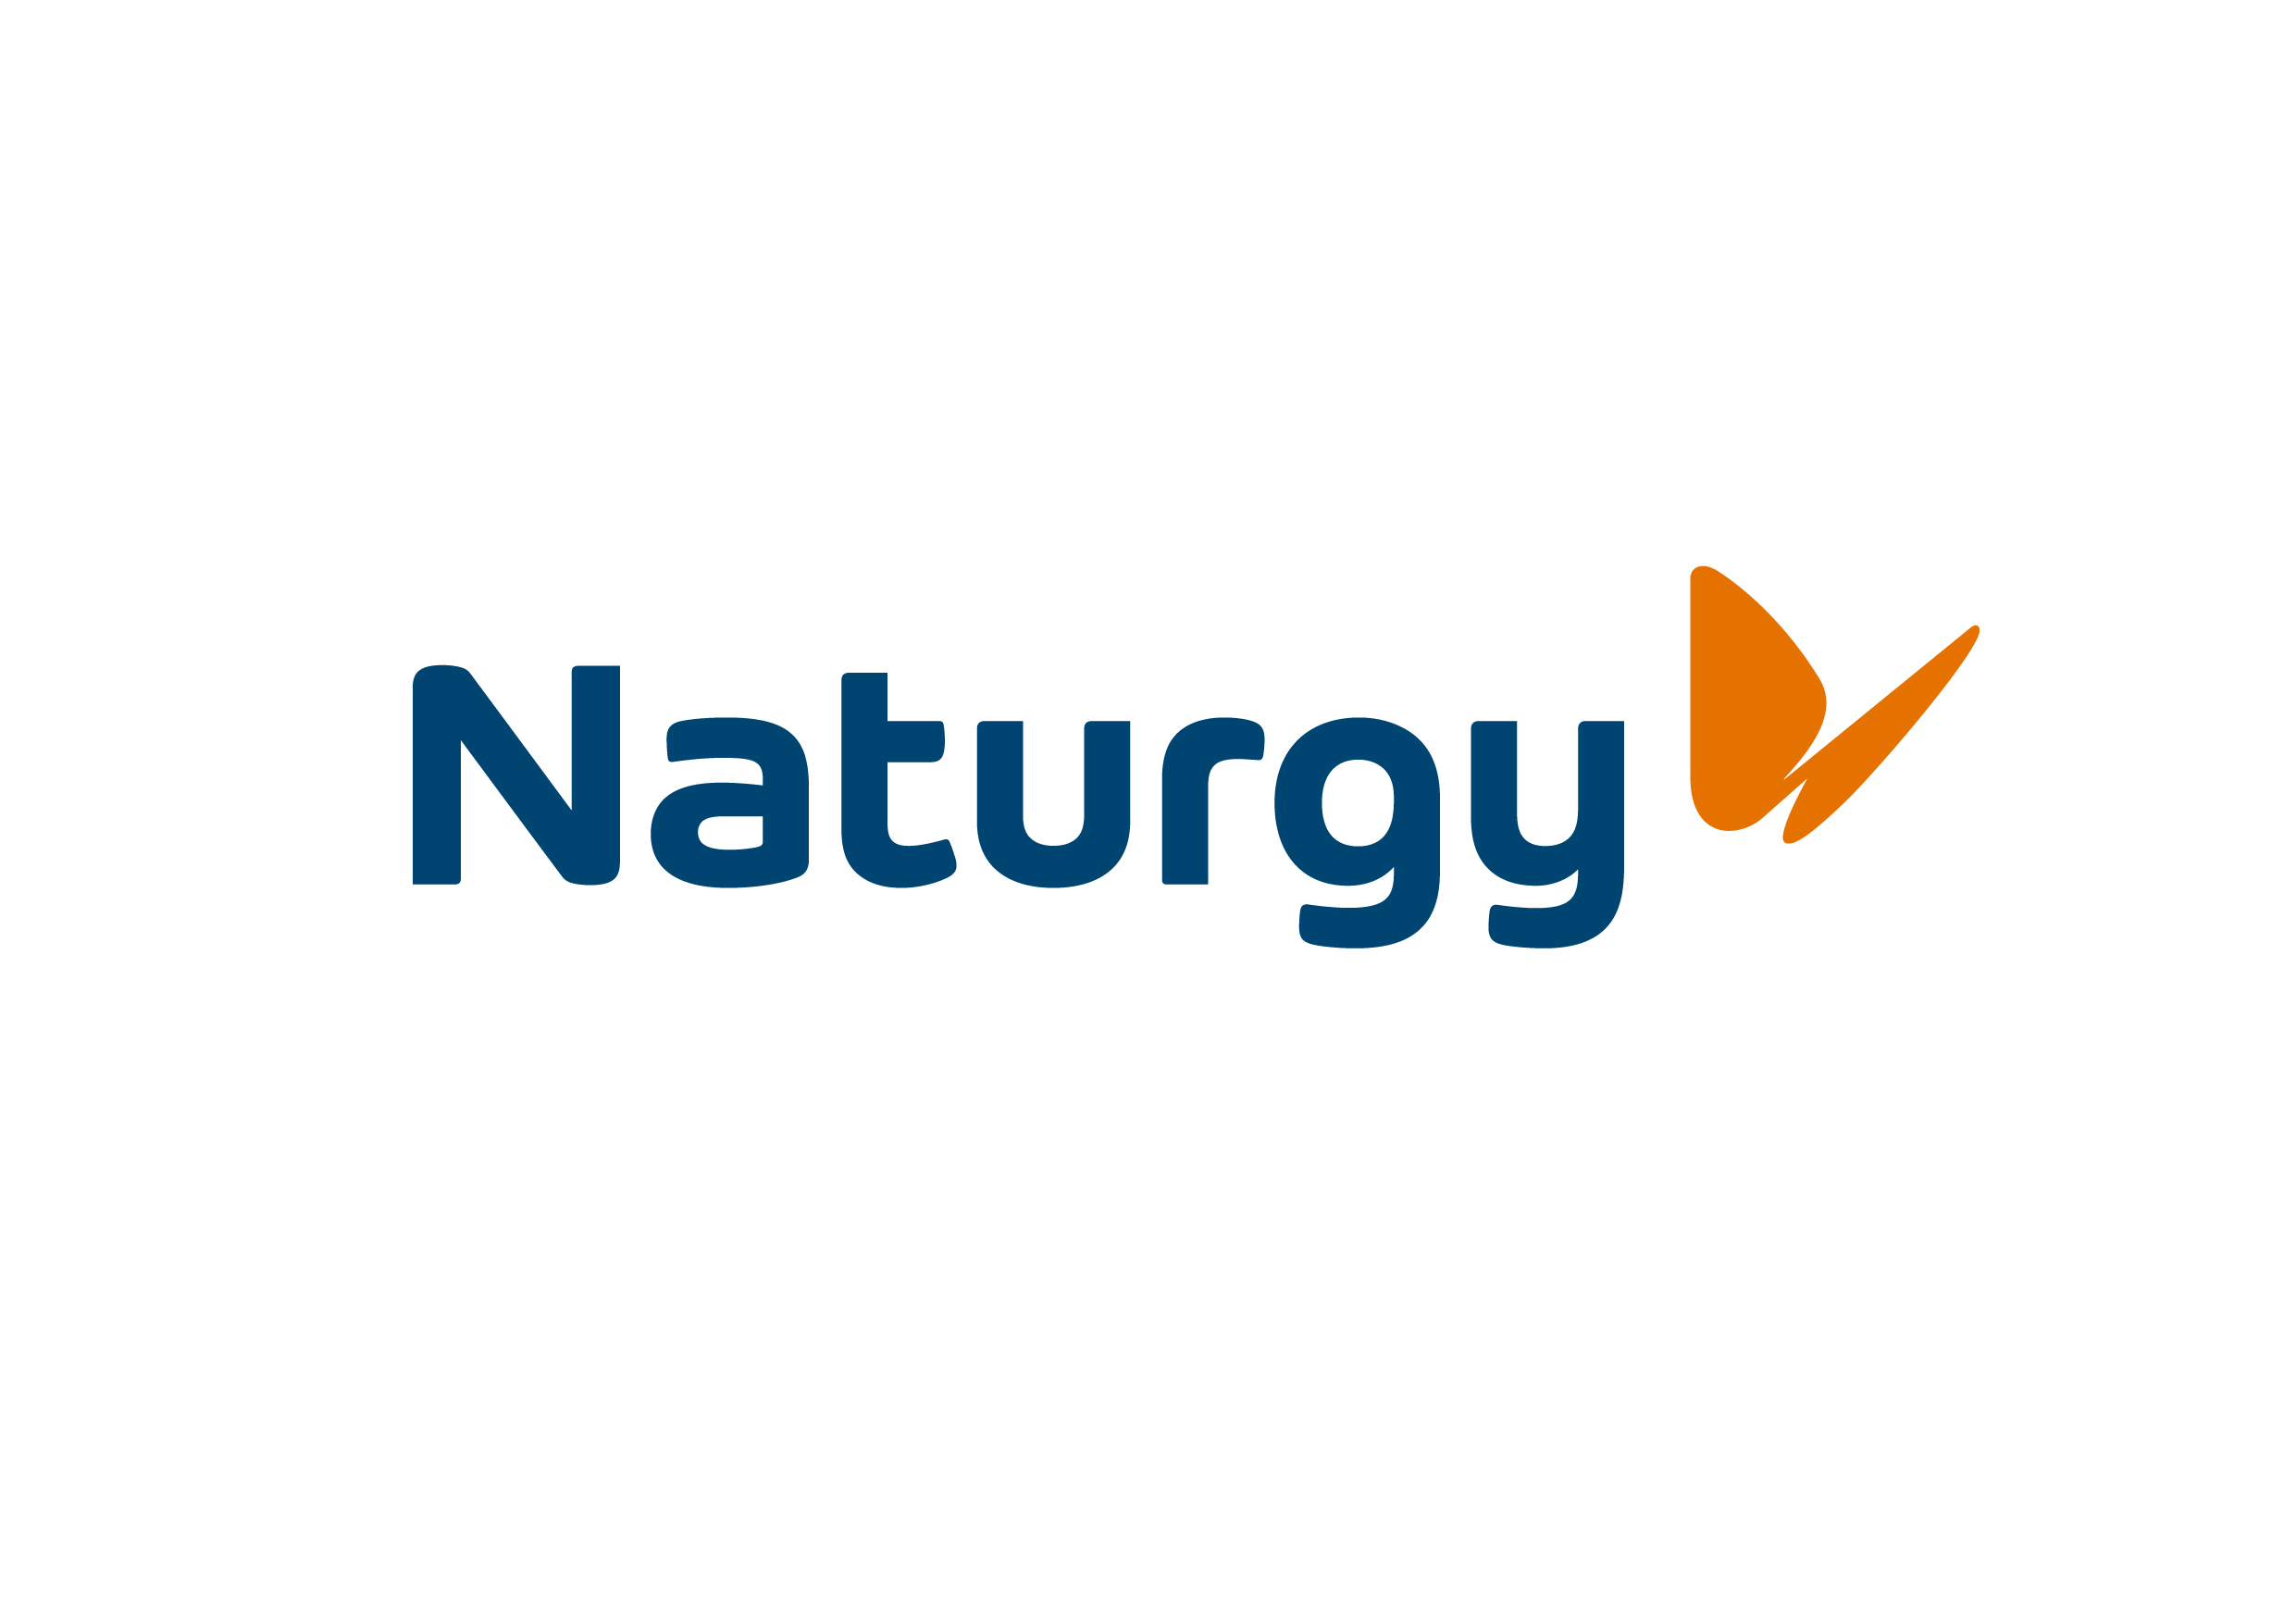 Naturgy, the New Brand for Gas Natural Fenosa Image